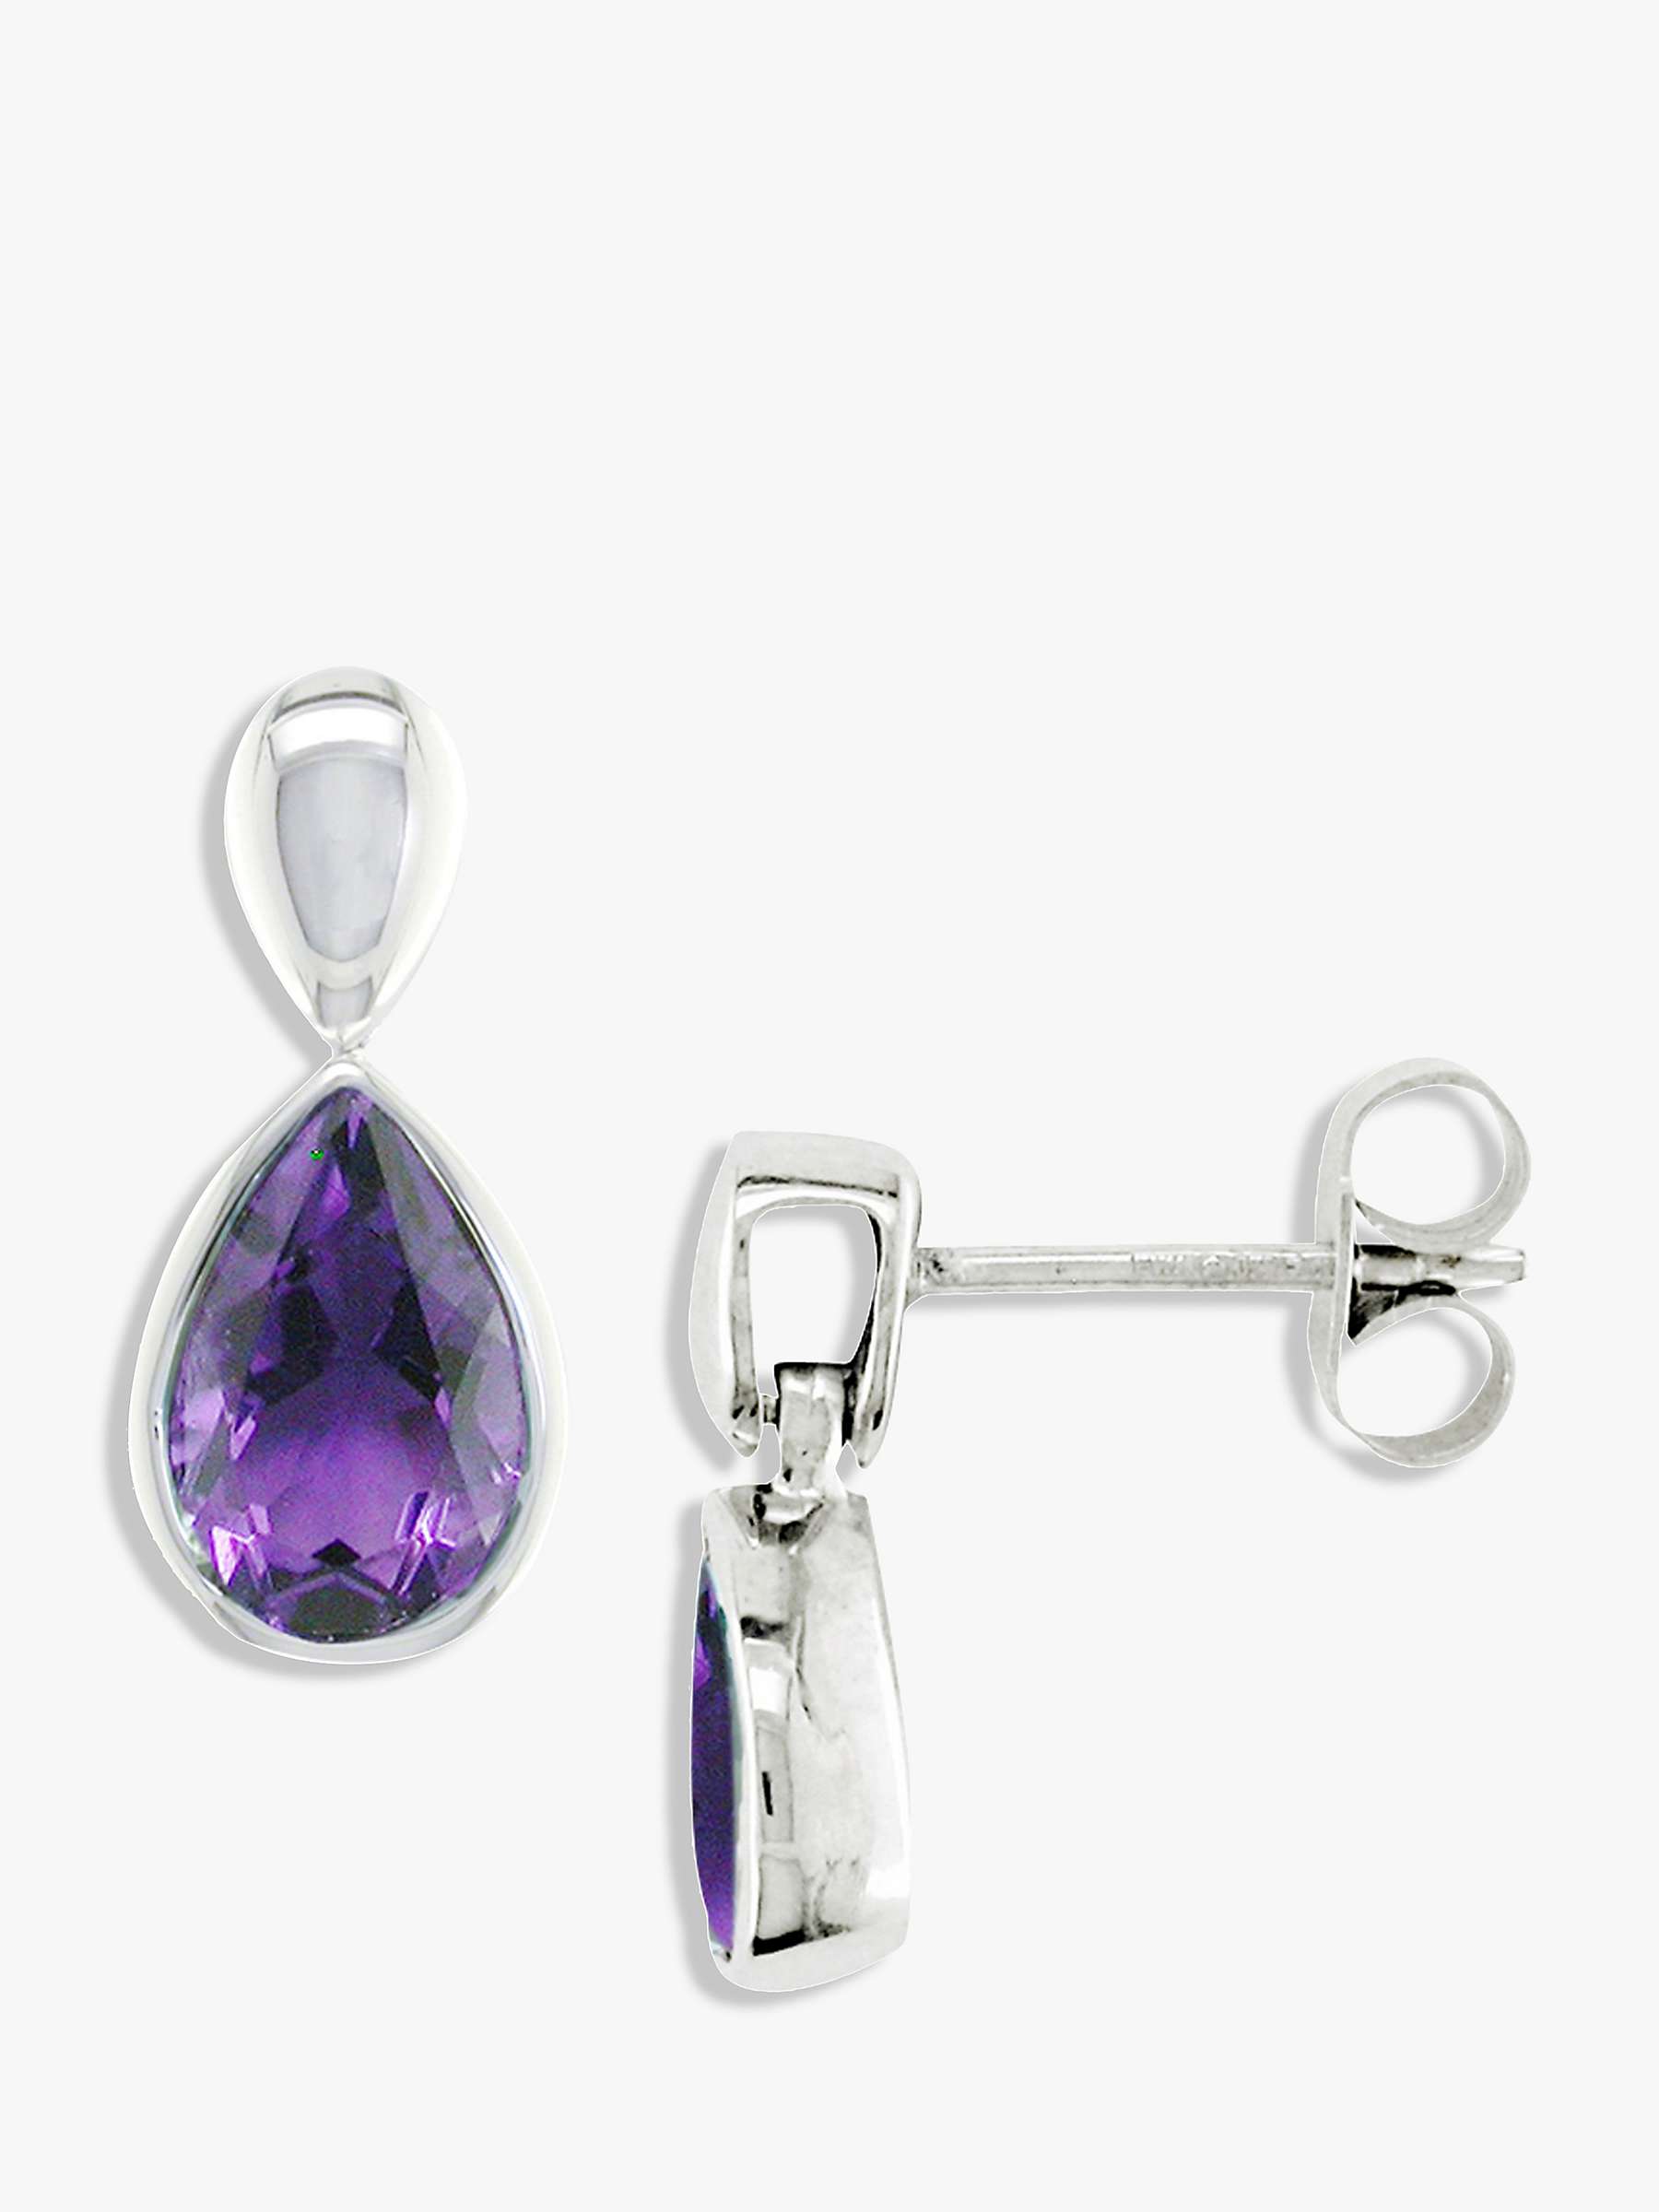 Buy E.W Adams 9ct White Gold Pear Drop Earrings Online at johnlewis.com